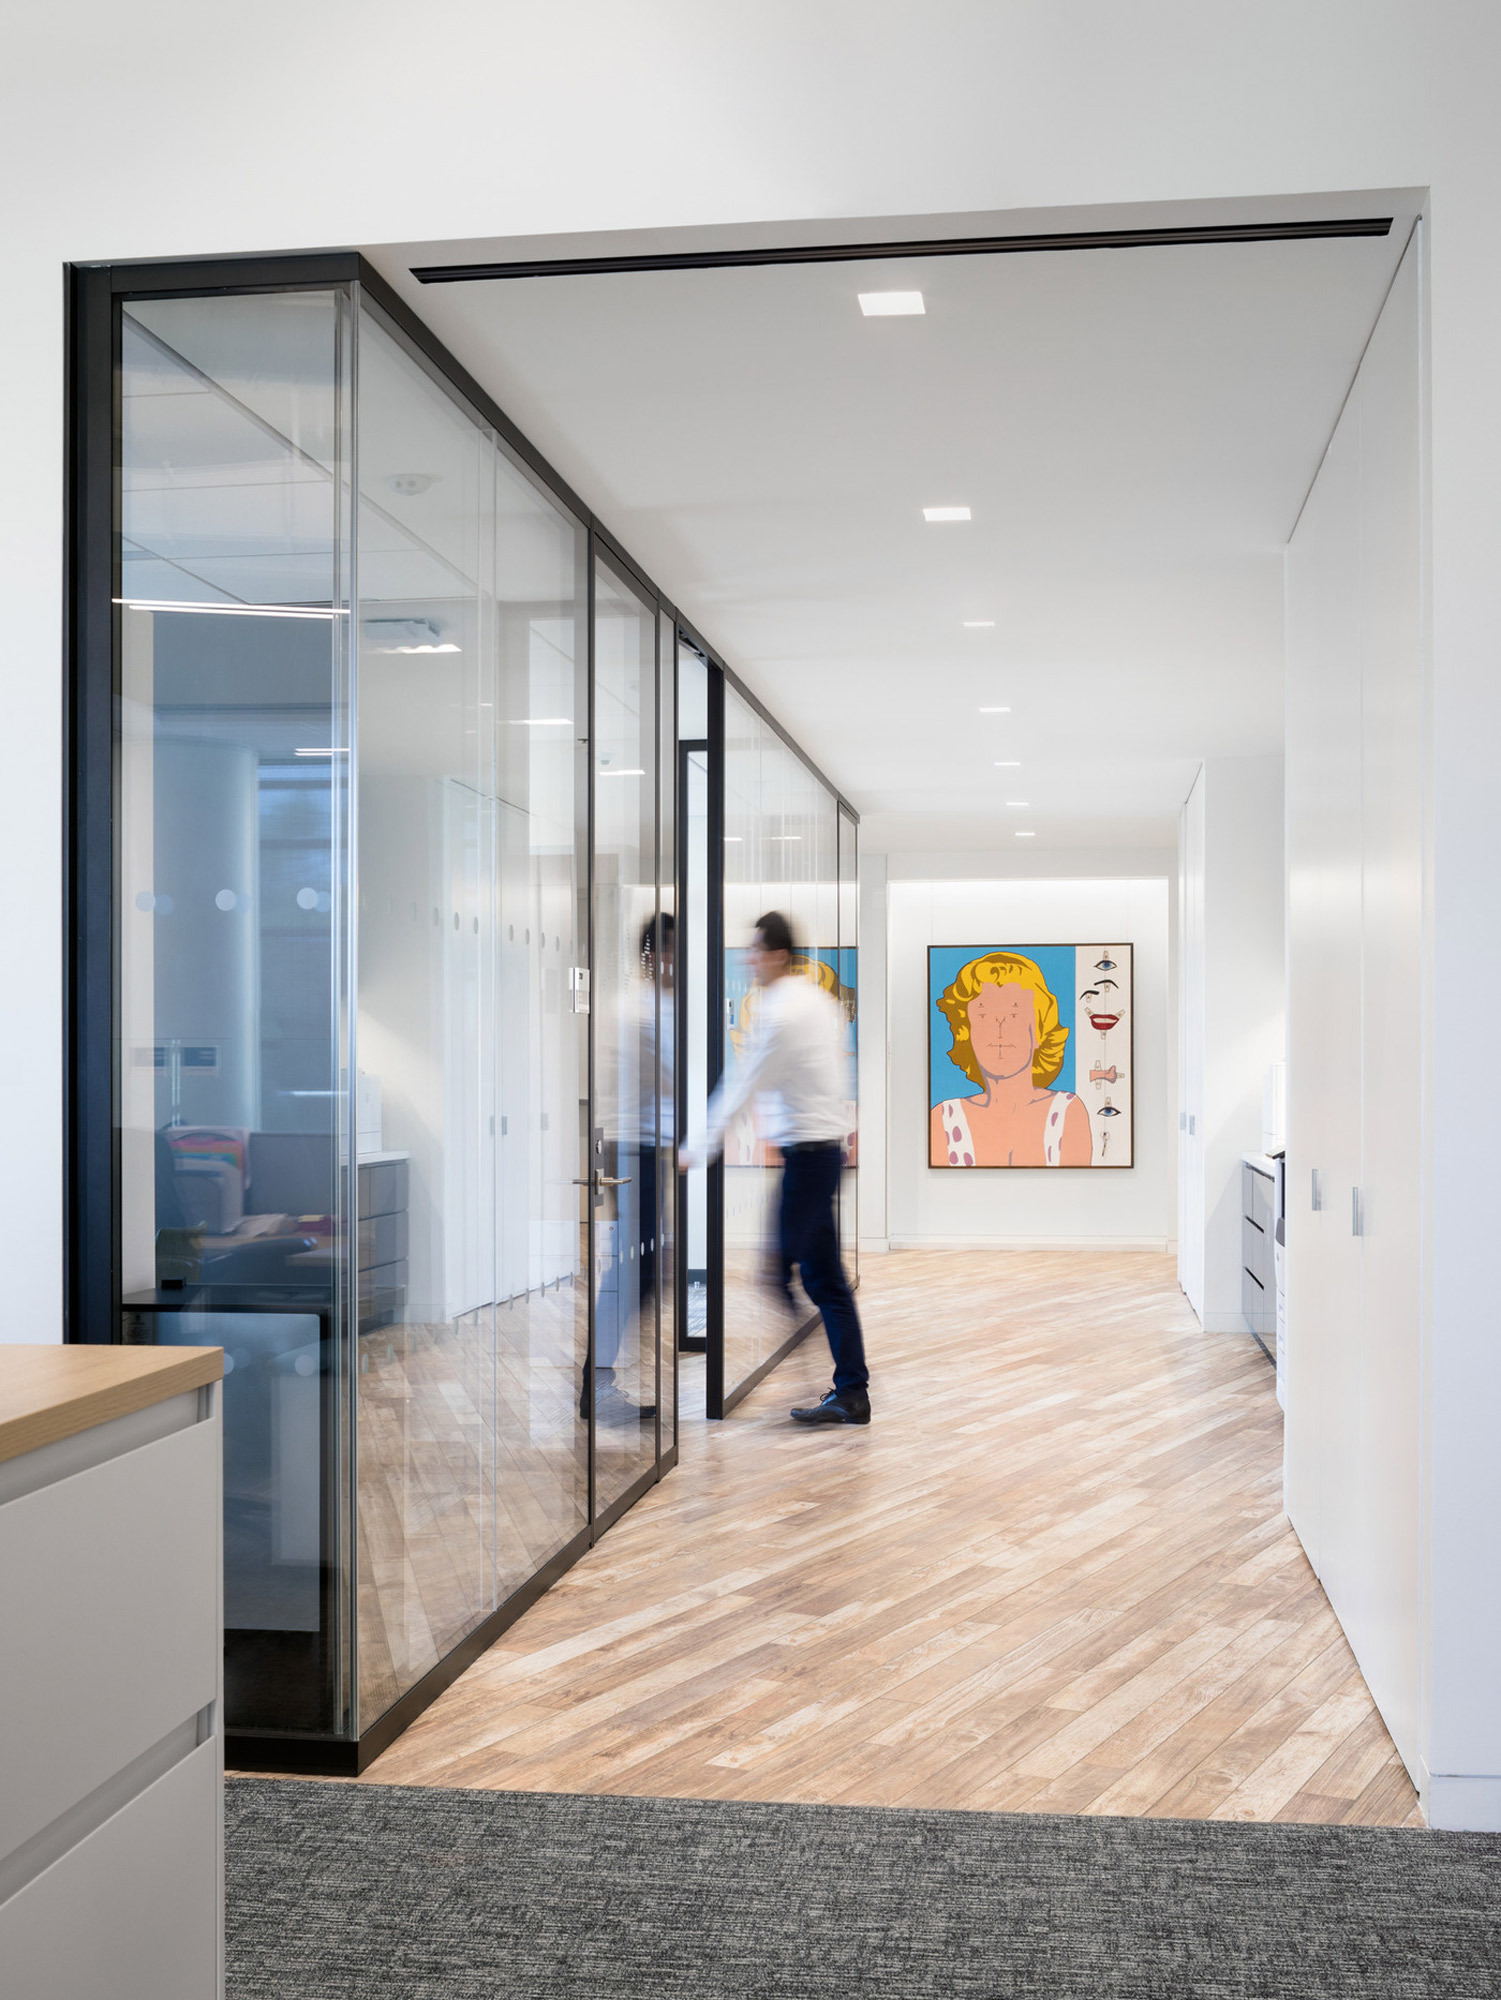 A modern office corridor with clear glass partition walls, light wooden flooring, and contemporary art on the right wall. A person walks past the semi-transparent meeting rooms, illustrating a blend of openness and privacy in the design.